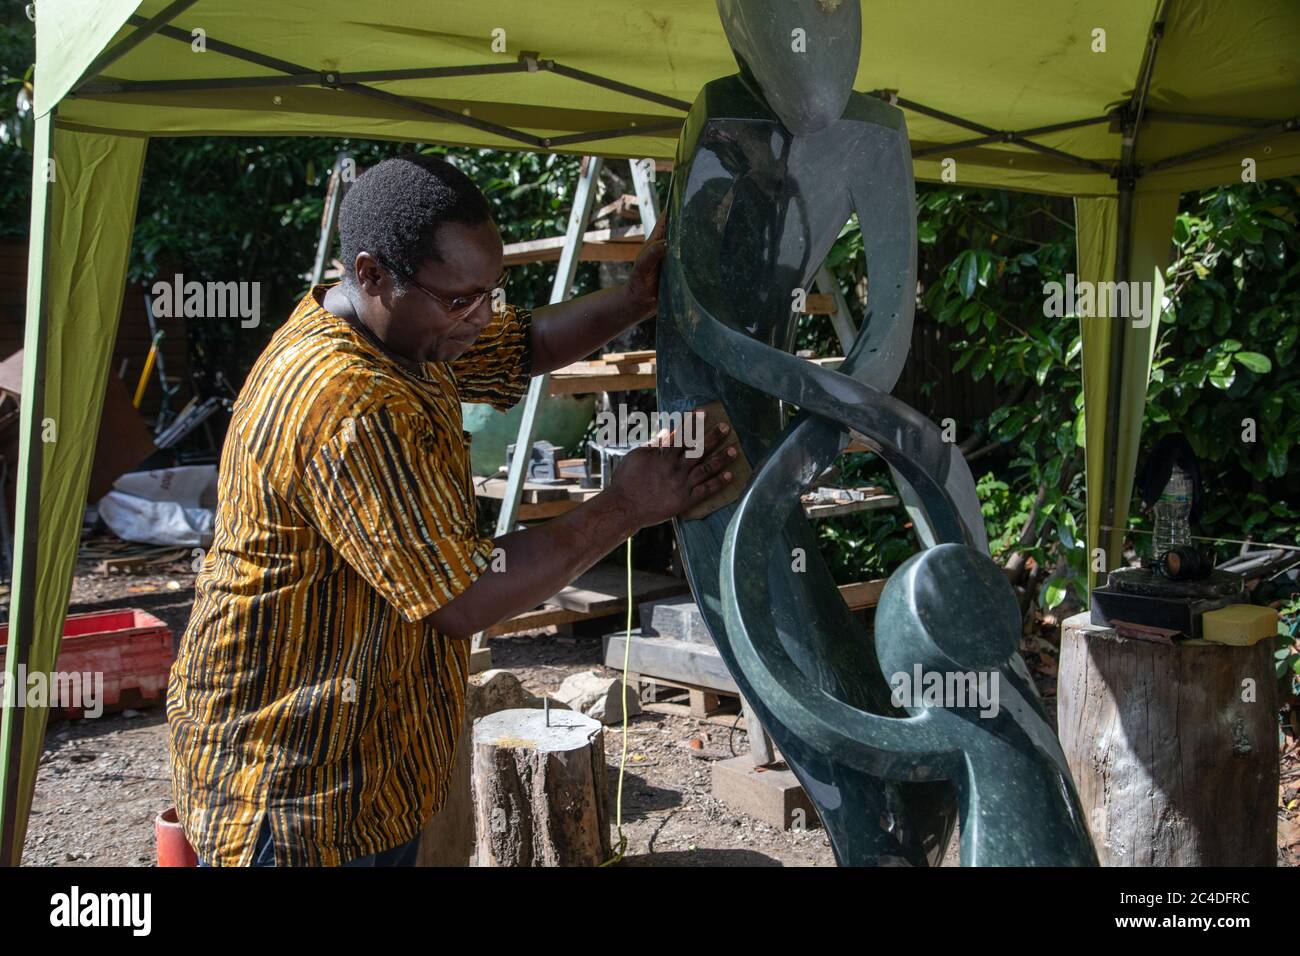 Churt, Surrey, UK. 26th June 2020. Zimbabwean sculptor Biggie Chikodzi working on a piece as Summers Place Auctions launches an online auction of Zimbabwean sculpture. Zimbabwe is the only country in Africa where artists make sculptures out of local stones. It is the first auction of its kind in the UK exclusively focusing on this African country’s artistic output.   Prices range from £200 to £40,000. The auction ends 5th July and includes works from famous first generation sculptors to younger third generation artists. Credit: Andy Sillett/Alamy Live News Stock Photo